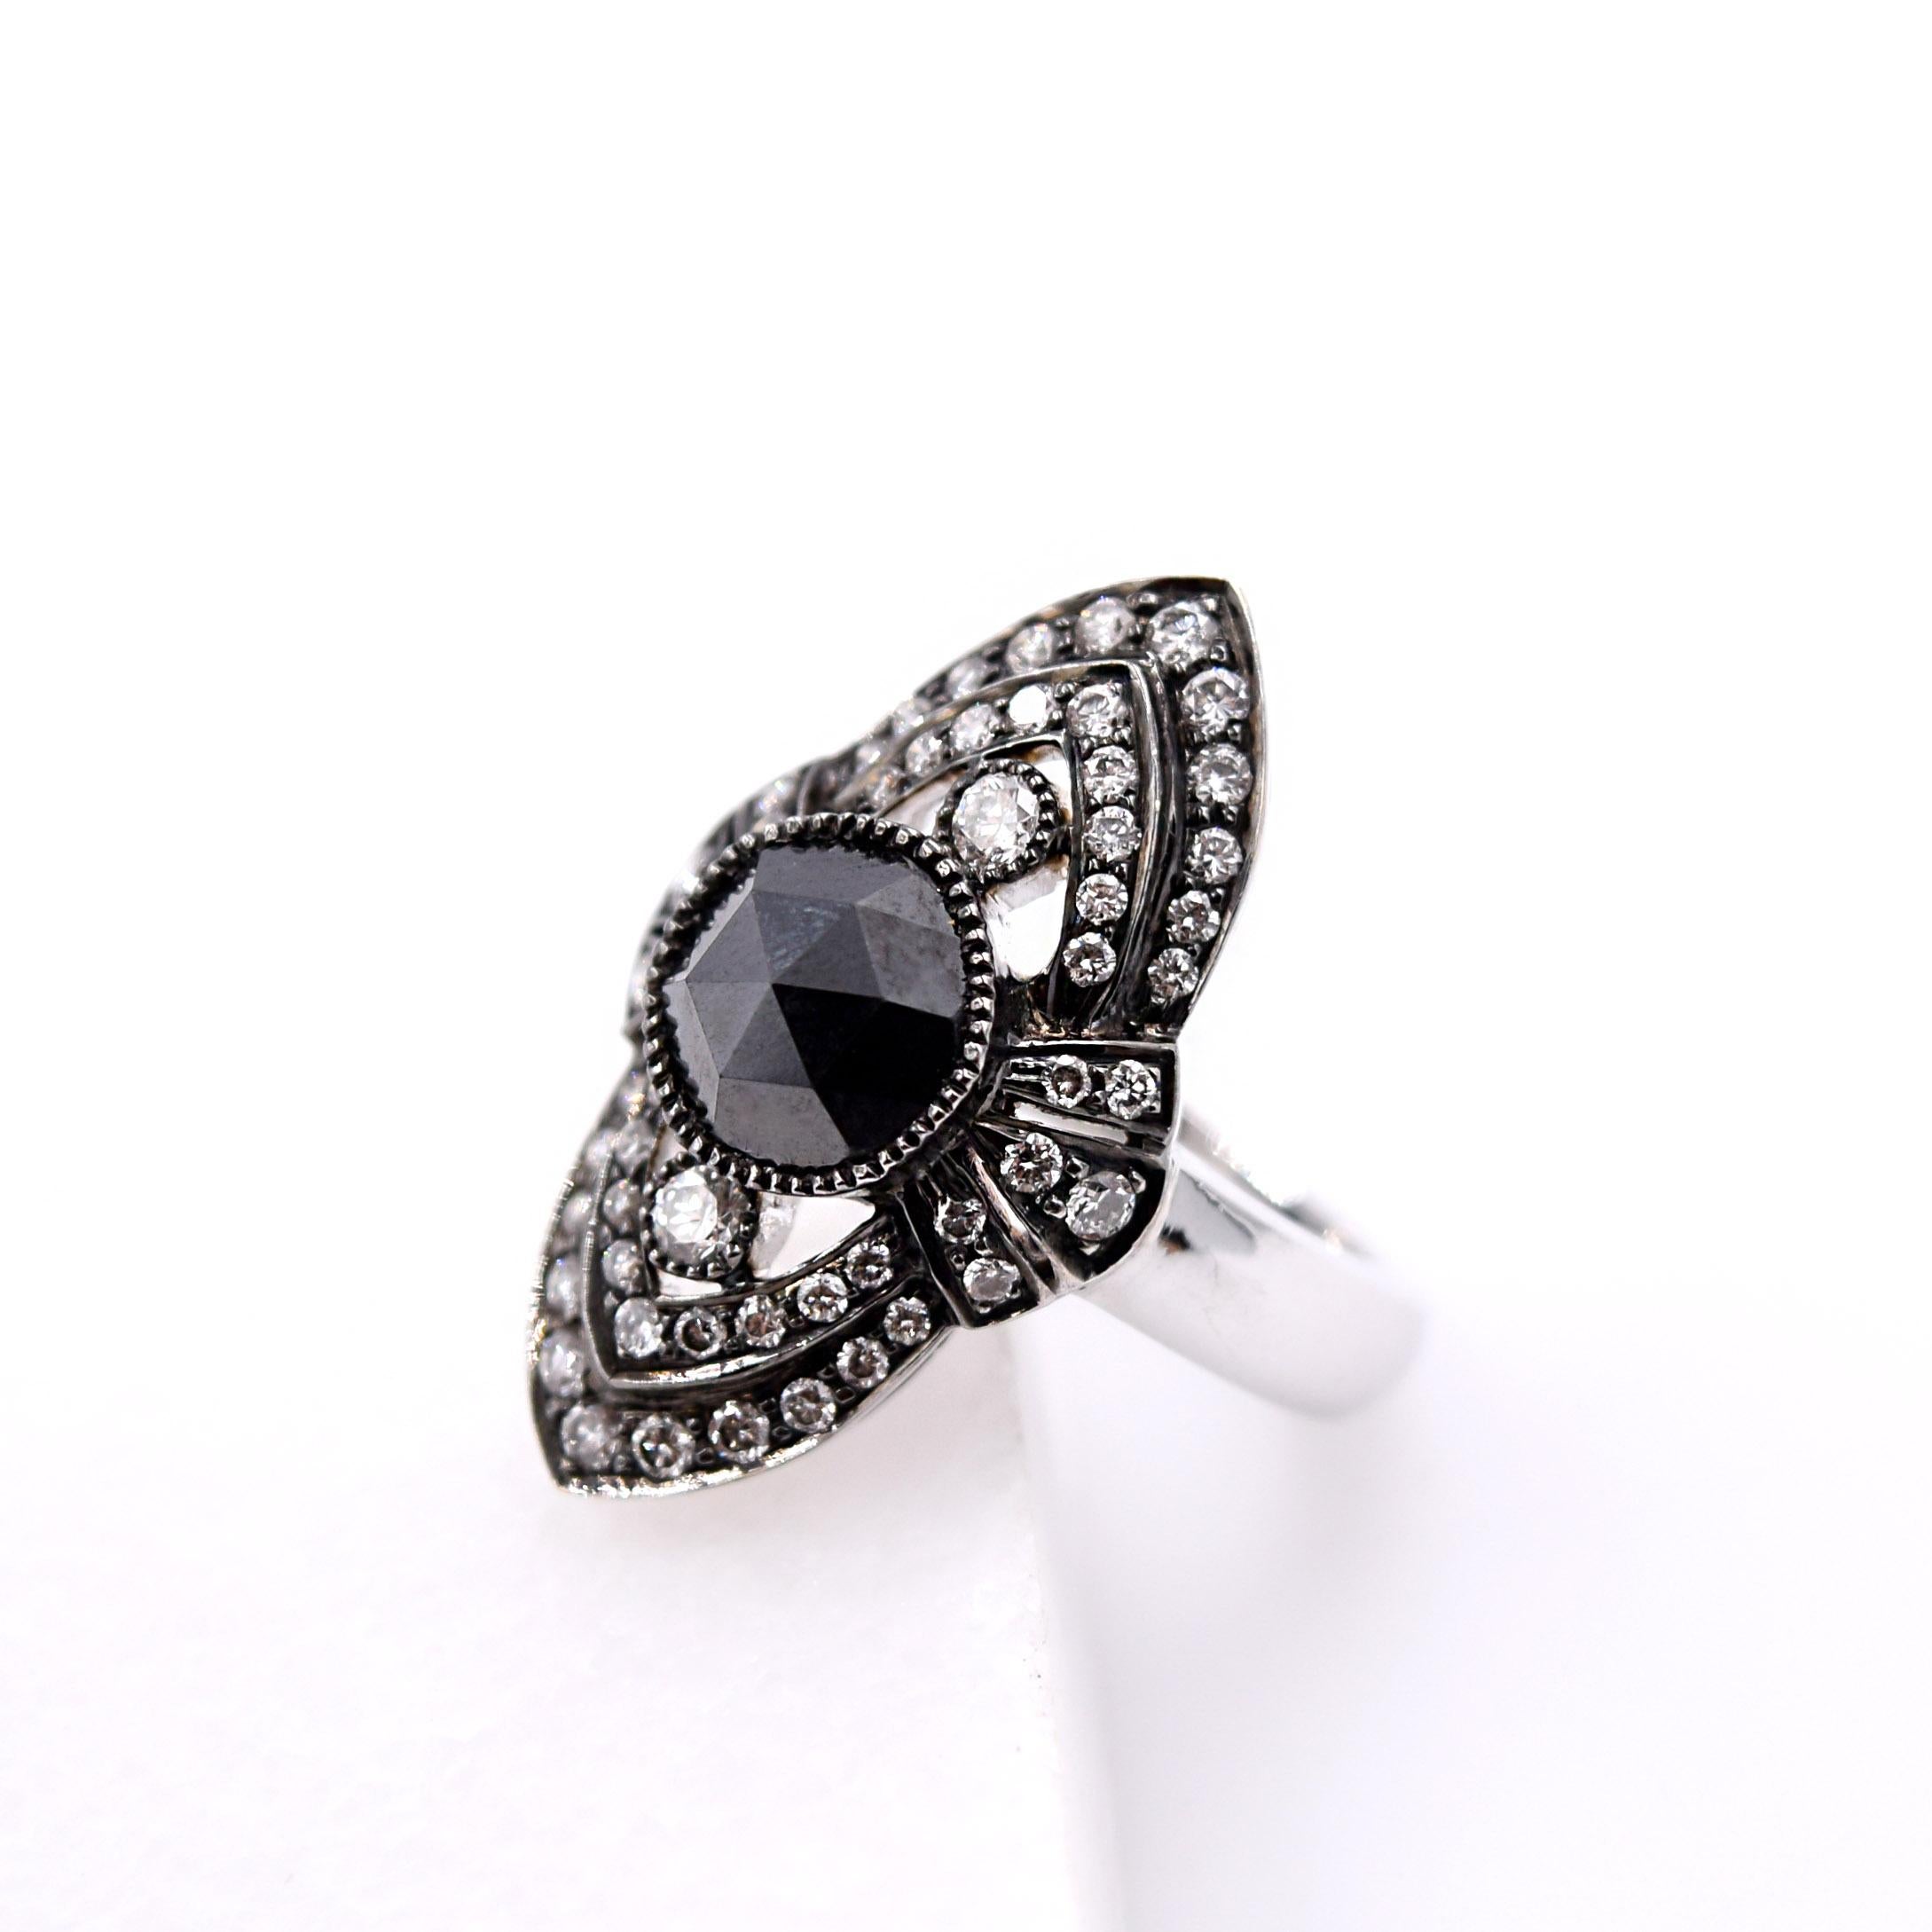 3.32 Carat Black Diamond Cocktail Ring in 18 Karat White Gold and Rhodium In New Condition For Sale In Mill Valley, CA